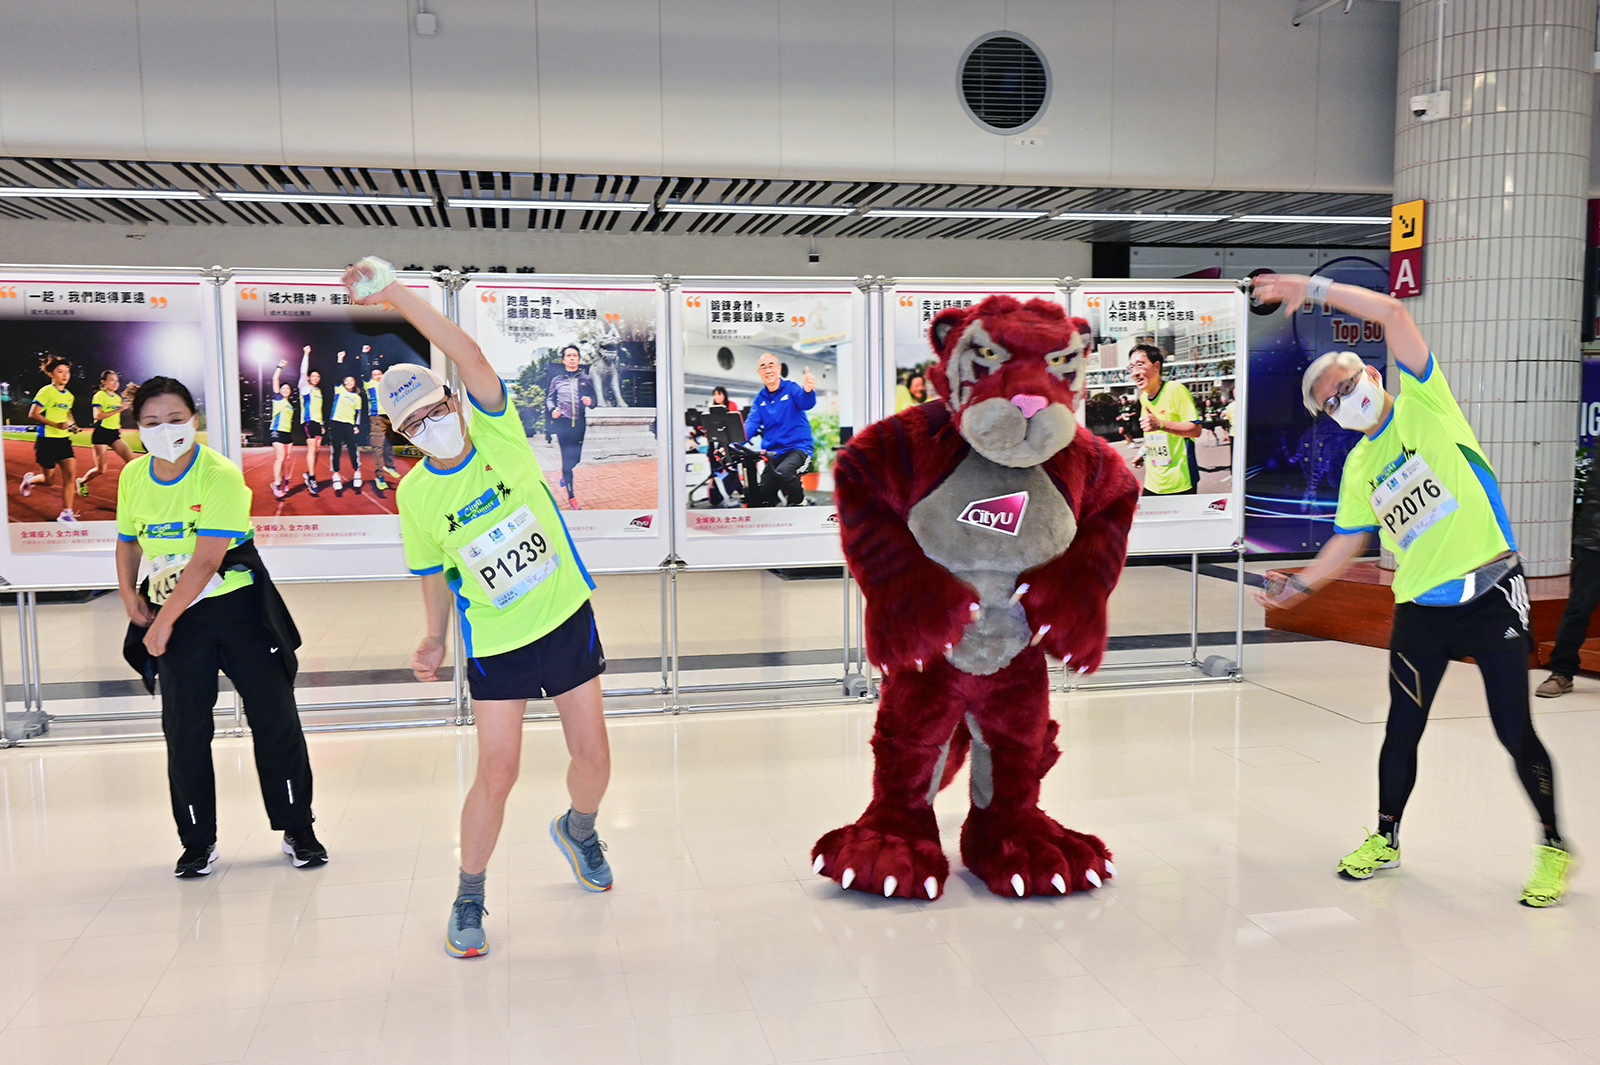 The University mascot showed support for CityU runners and warmed up together before the race!